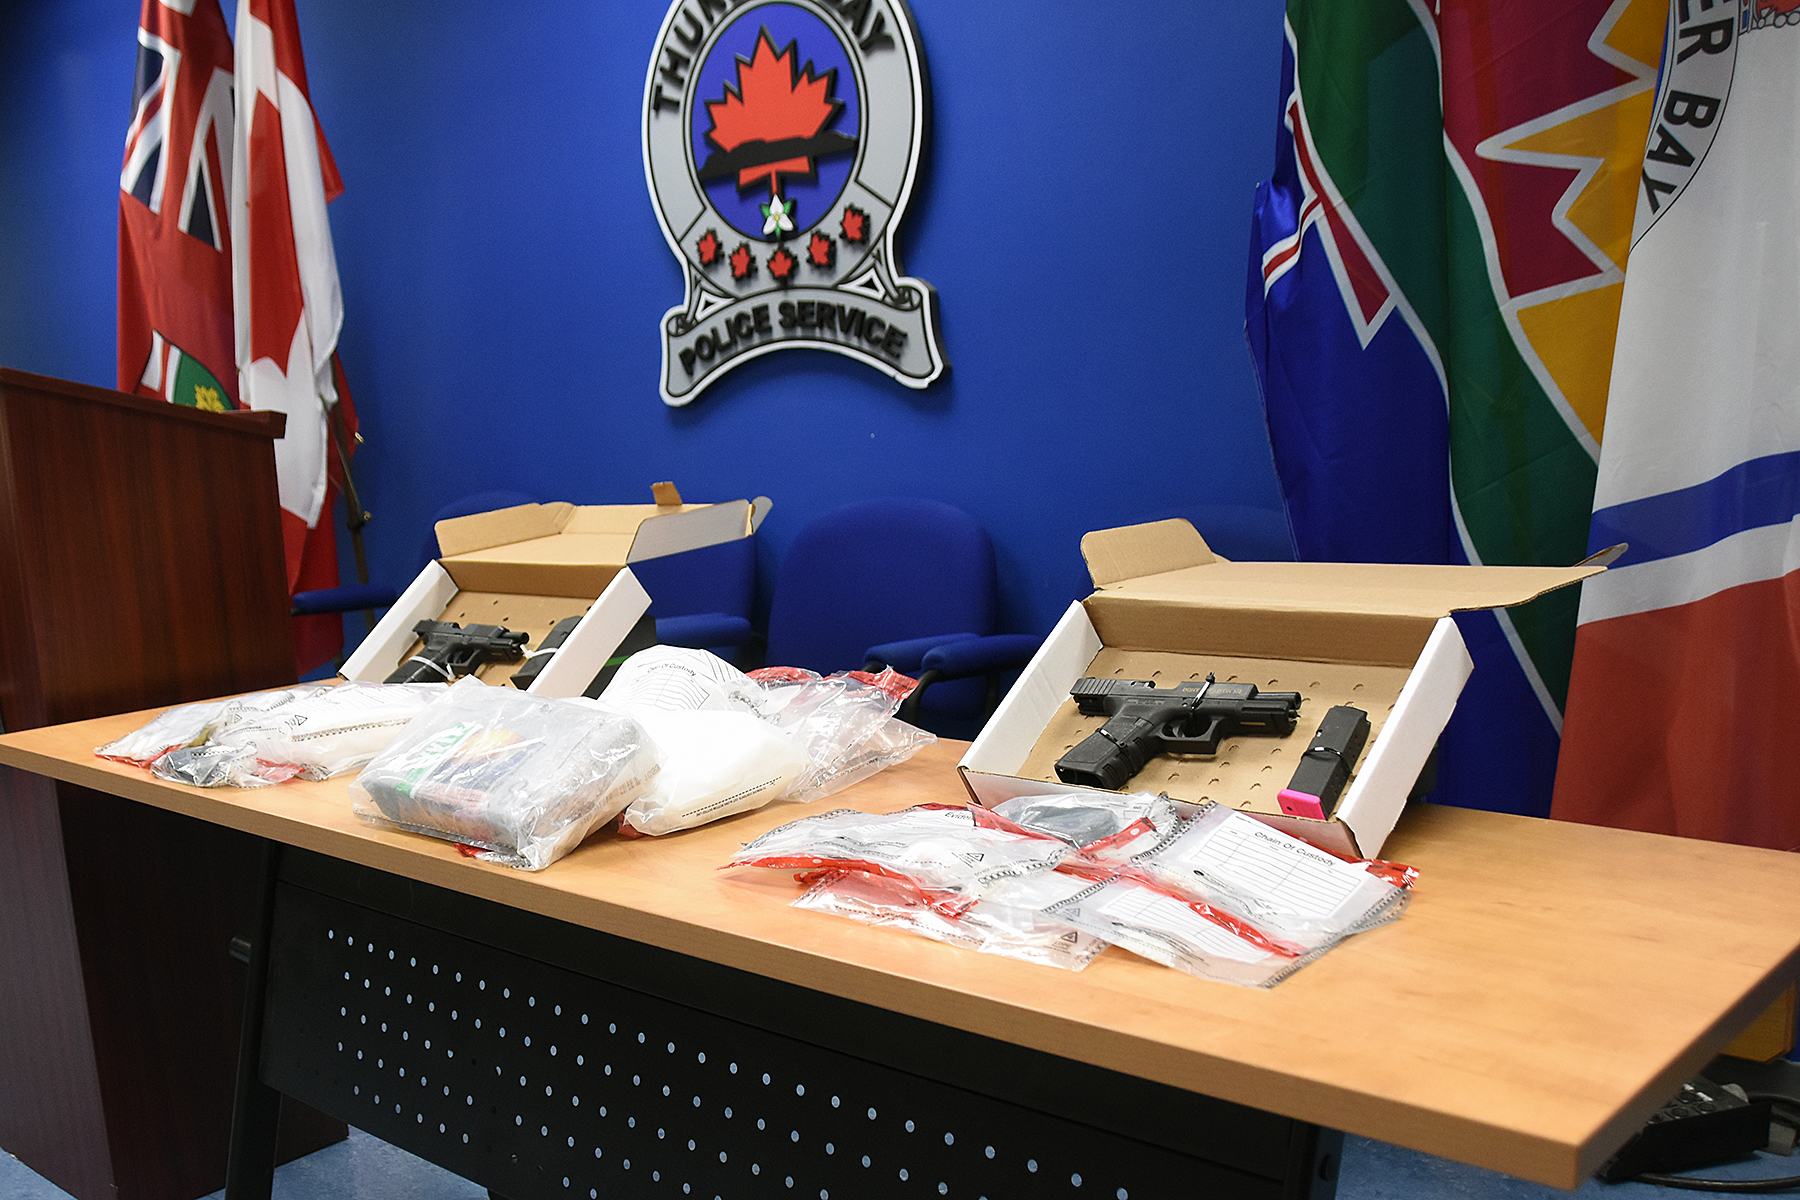 Items seized as a result of drug trafficking investigations are displayed.